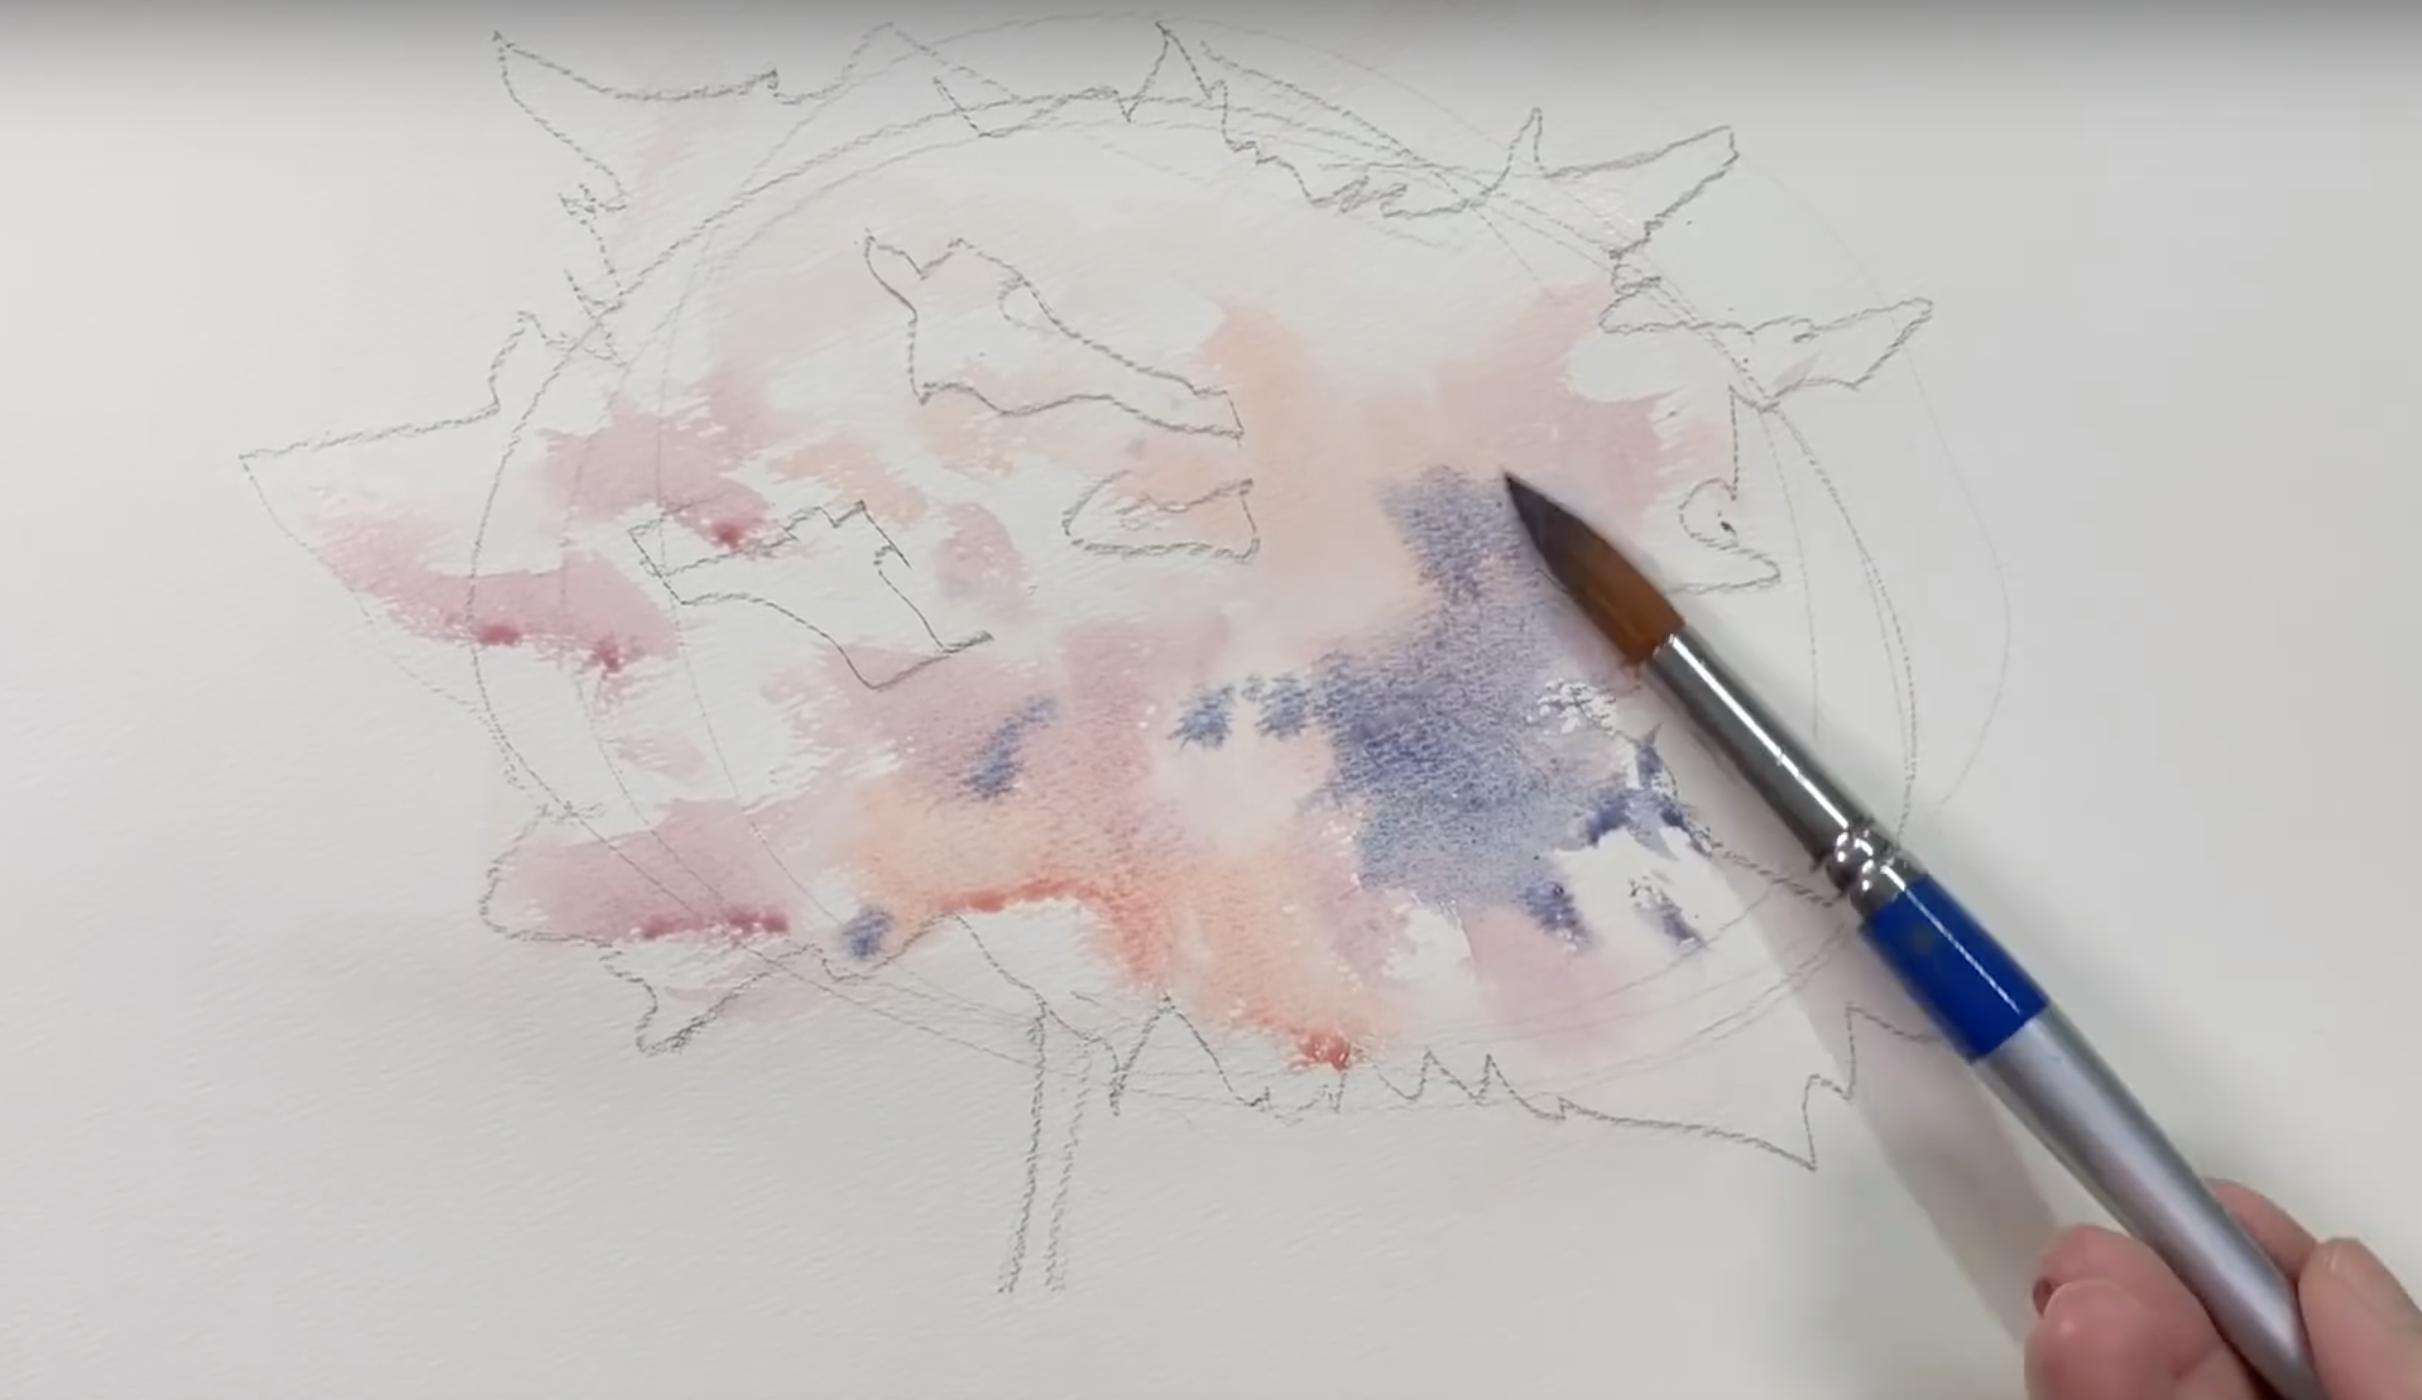 easy-watercolor-techniques-painting-japanese-flowers-within-5-minutes - STEP 2